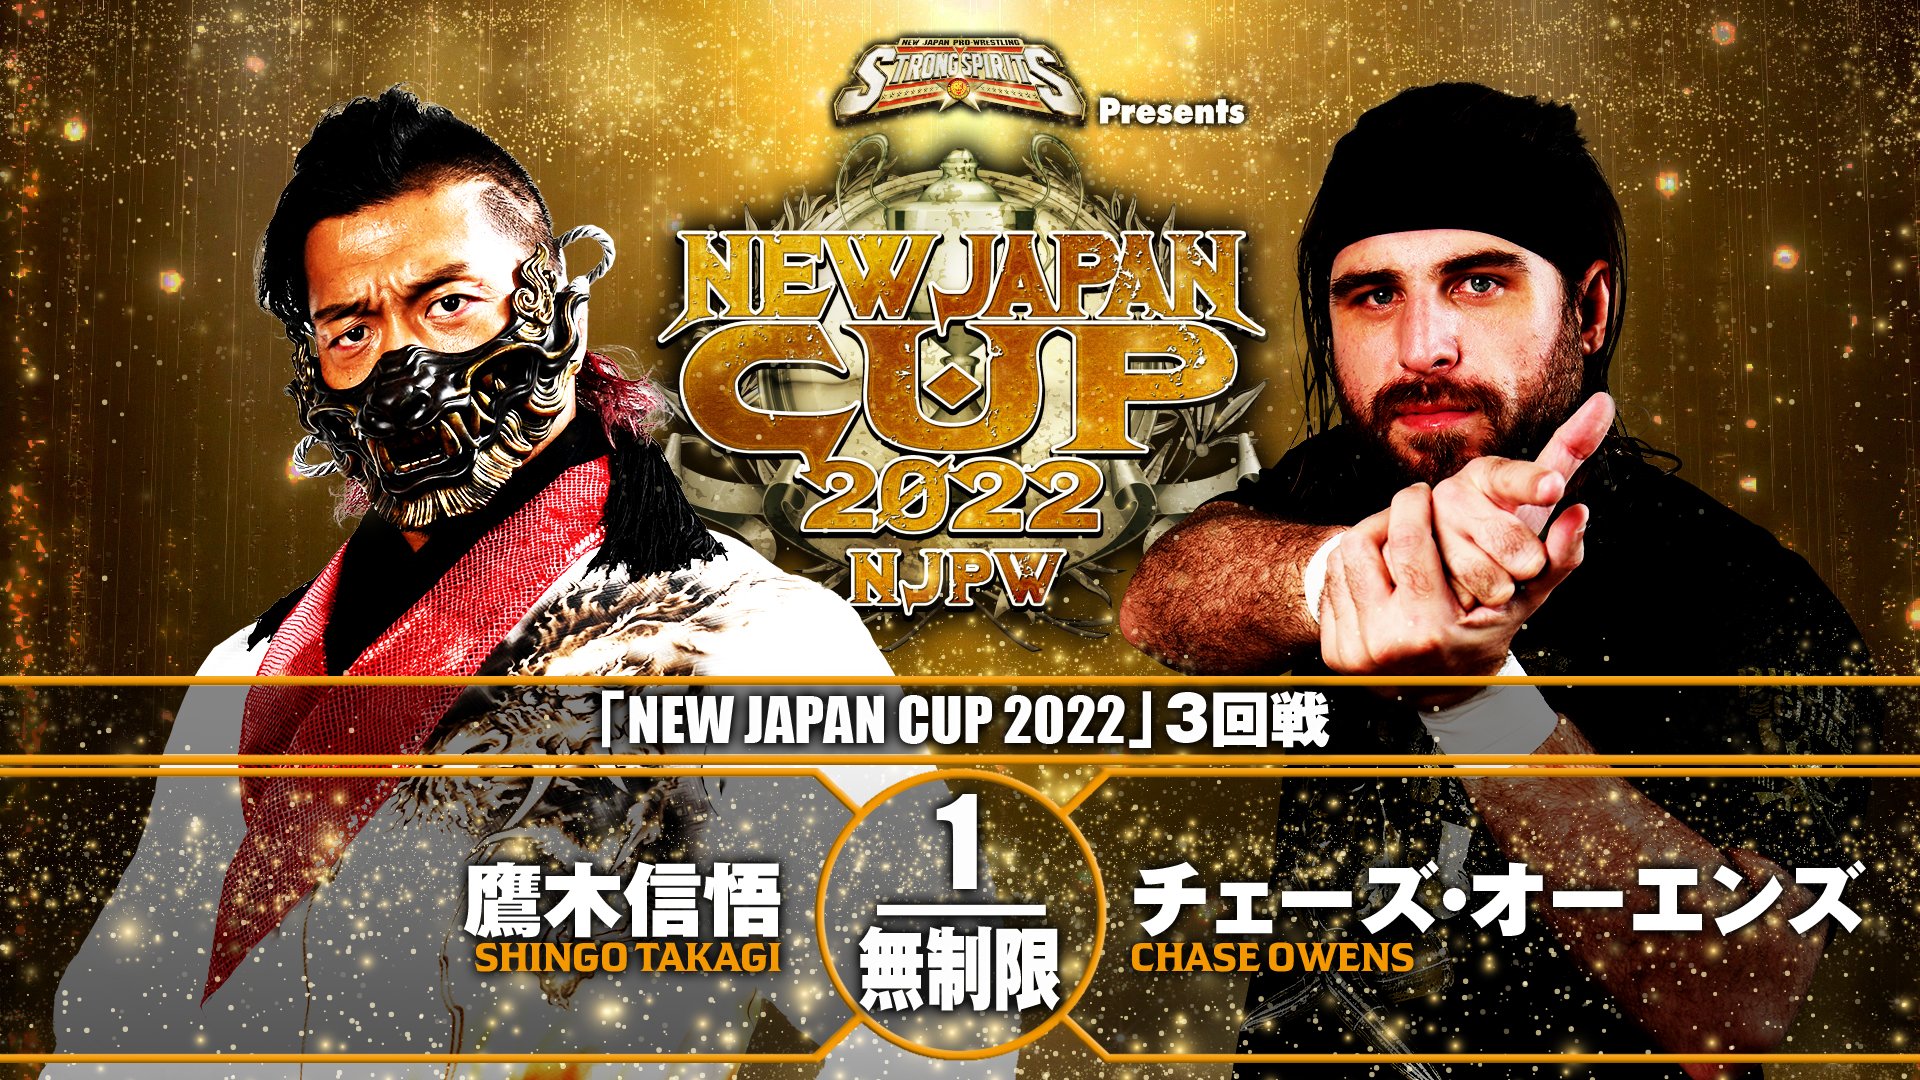 NEW JAPAN CUP 2022 3RD ROUND MATCH